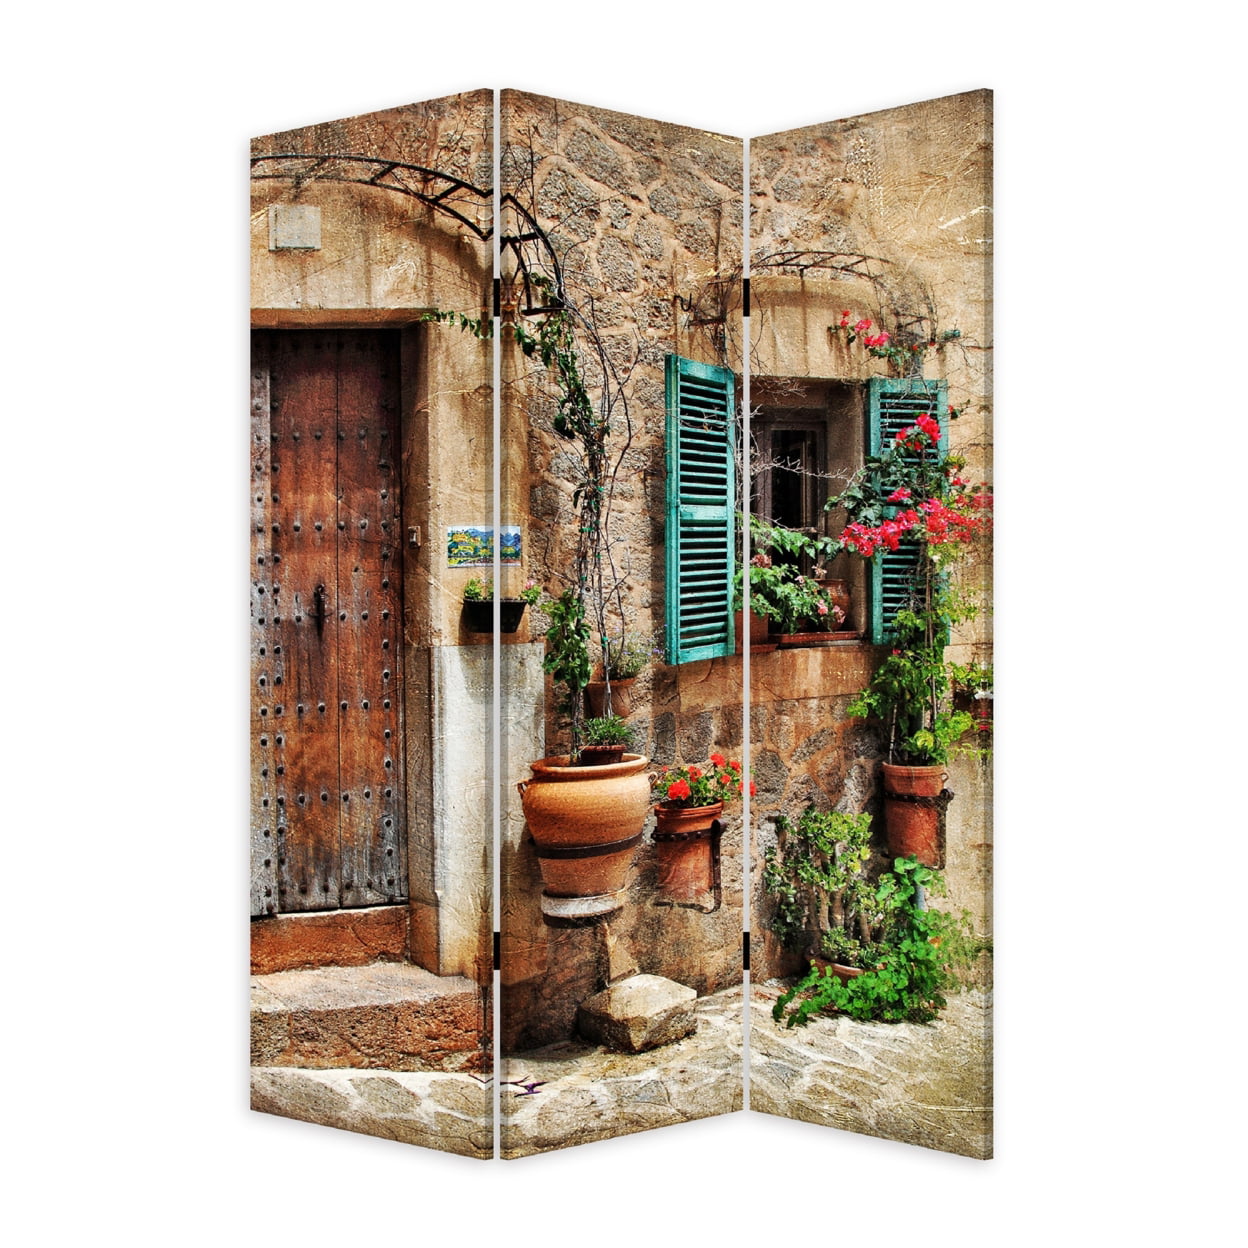 Picture of Benjara BM276725 72 in. 3 Panel Canvas Room Divider - Streets - Flowers - Plants, Multi Color